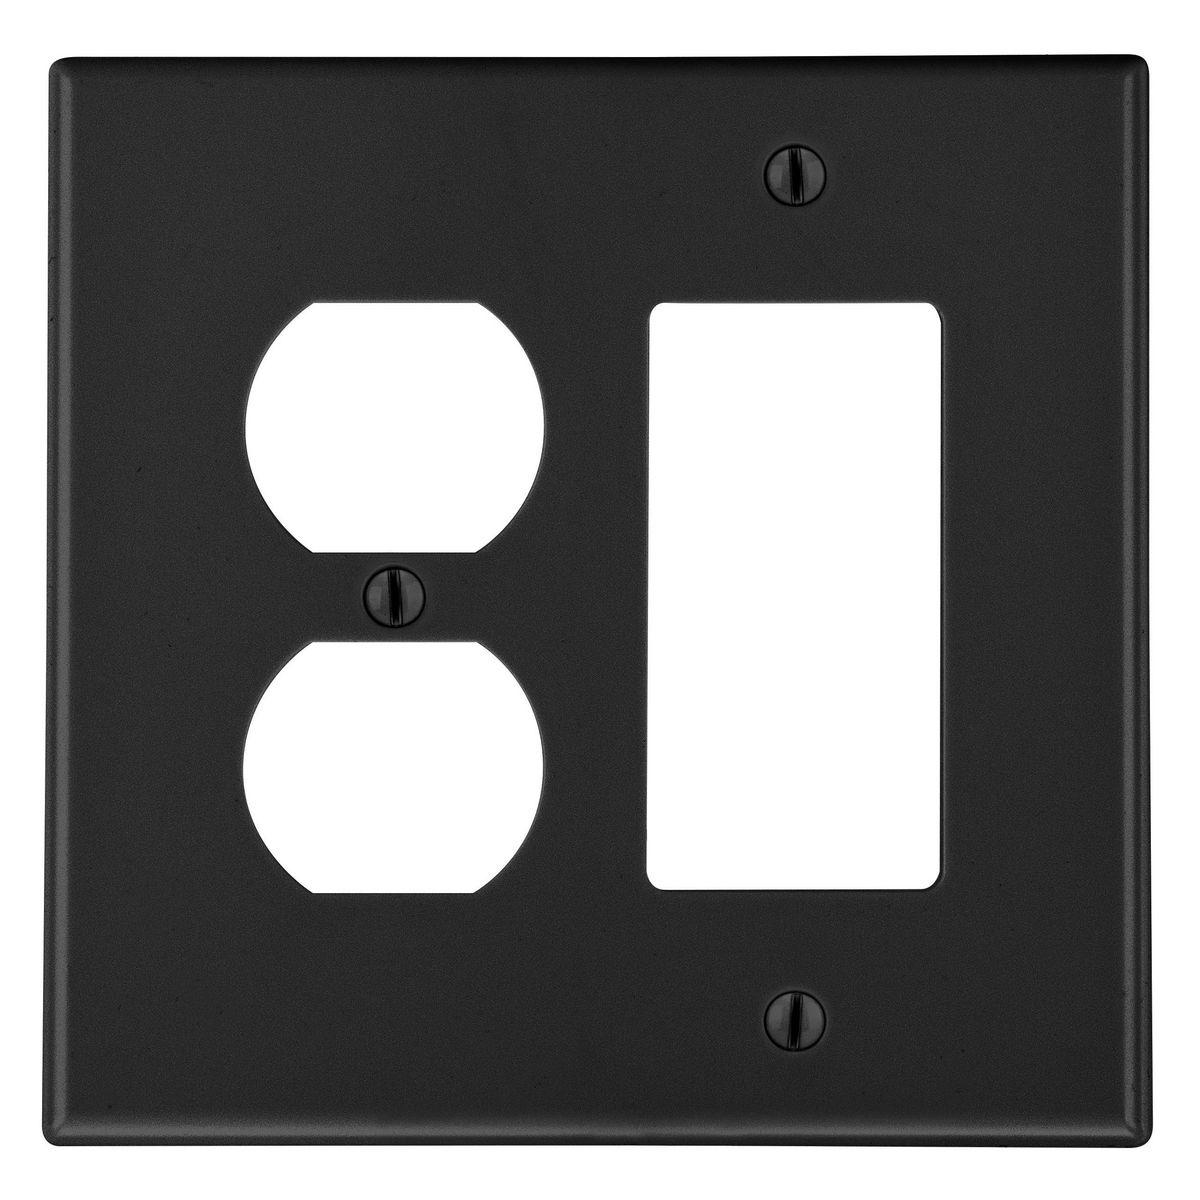 Hubbell PJ826BK Wallplate, Mid-Size 2-Gang, 1) Duplex 1) Decorator, Black  ; High-impact, self-extinguishing polycarbonate material ; More Rigid ; Sharp lines and less dimpling ; Smooth satin finish ; Blends into wall with an optimum finish ; Smooth Satin Finish